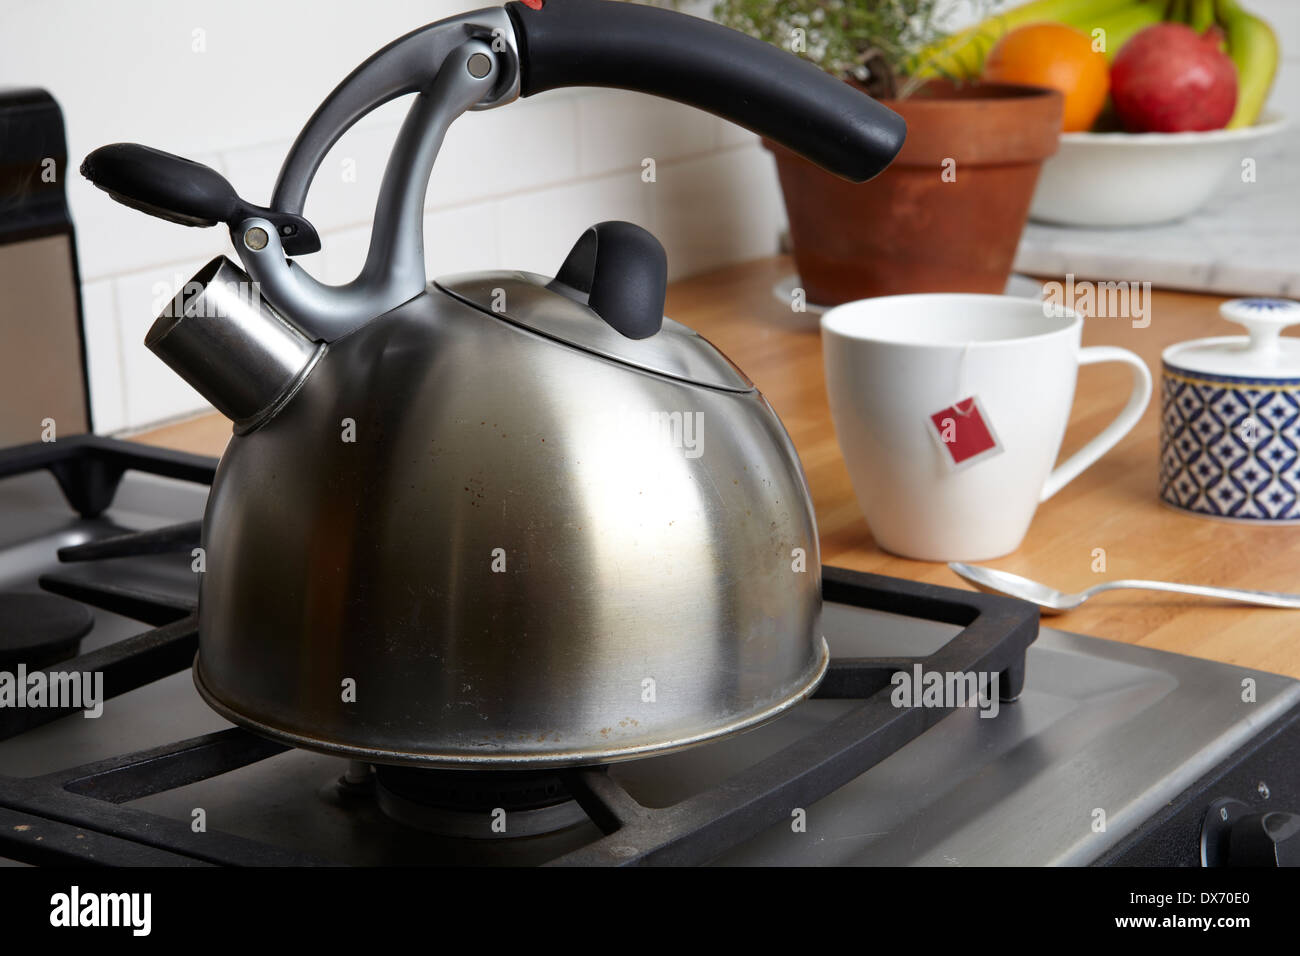 https://c8.alamy.com/comp/DX70E0/tea-kettle-on-stove-top-in-the-kitchen-DX70E0.jpg